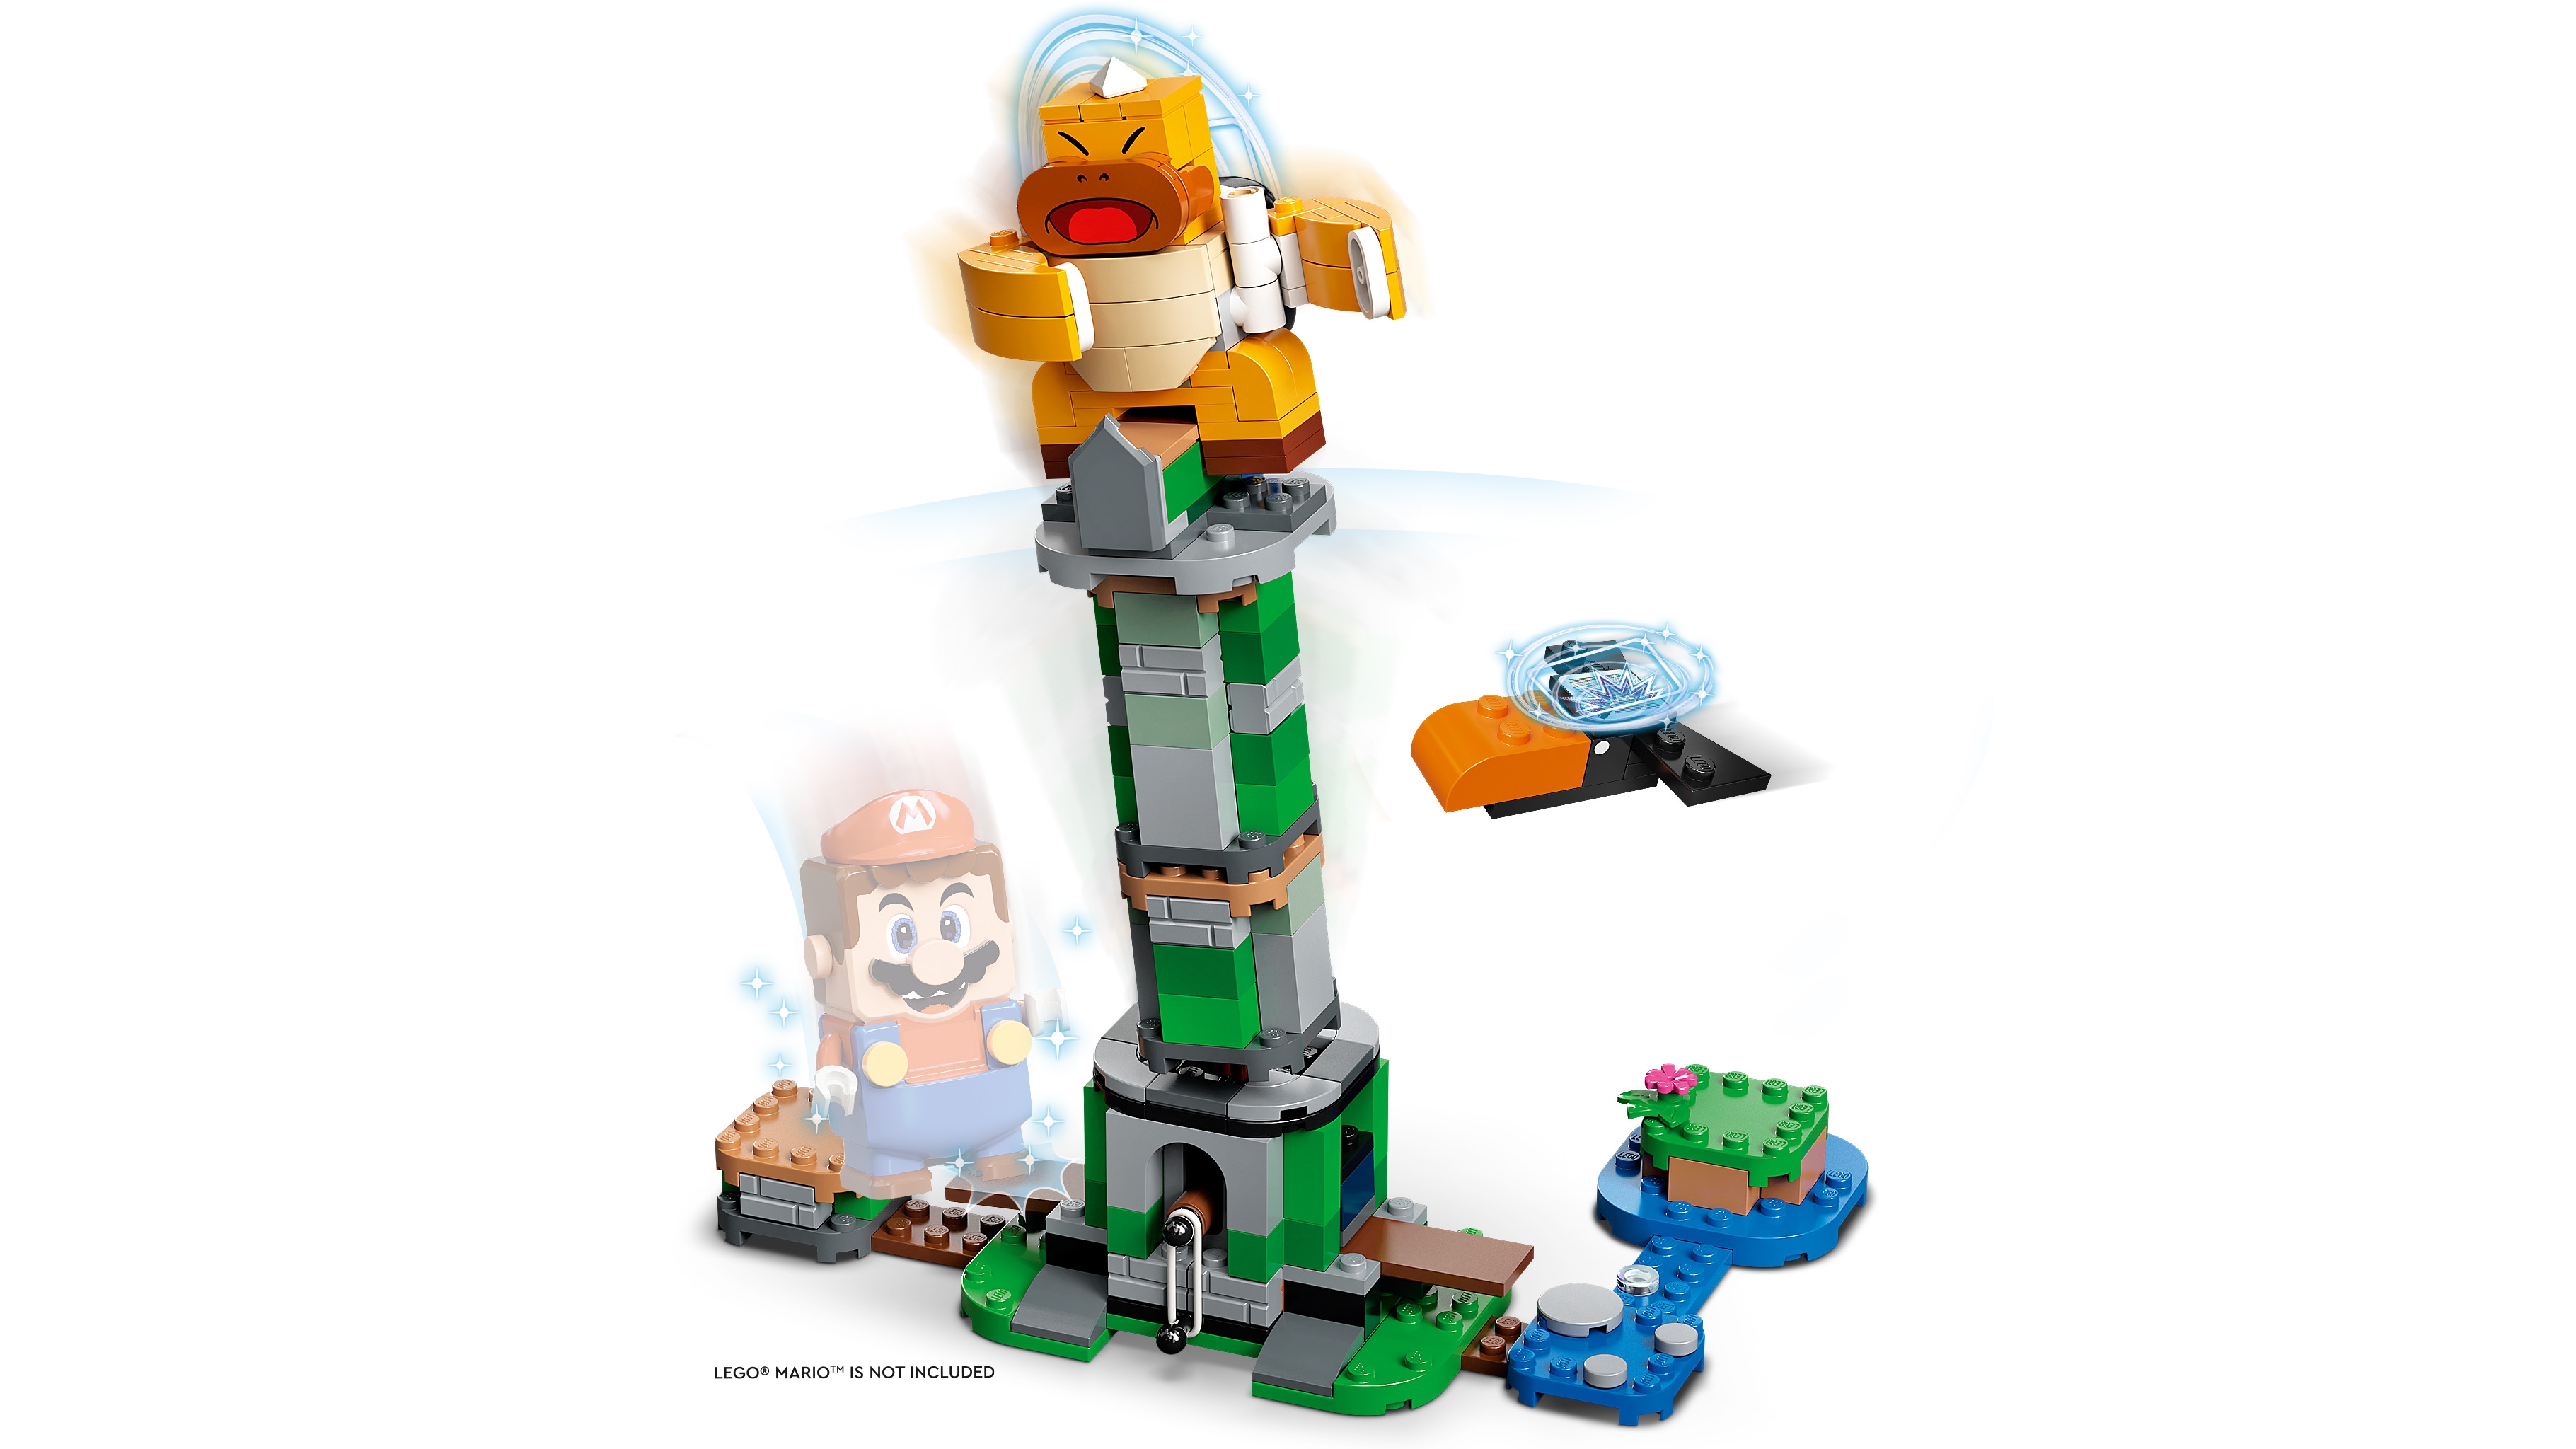 LEGO Luigi's Mansion Haunt-and-Seek Expansion Set (71401) – The Red Balloon  Toy Store